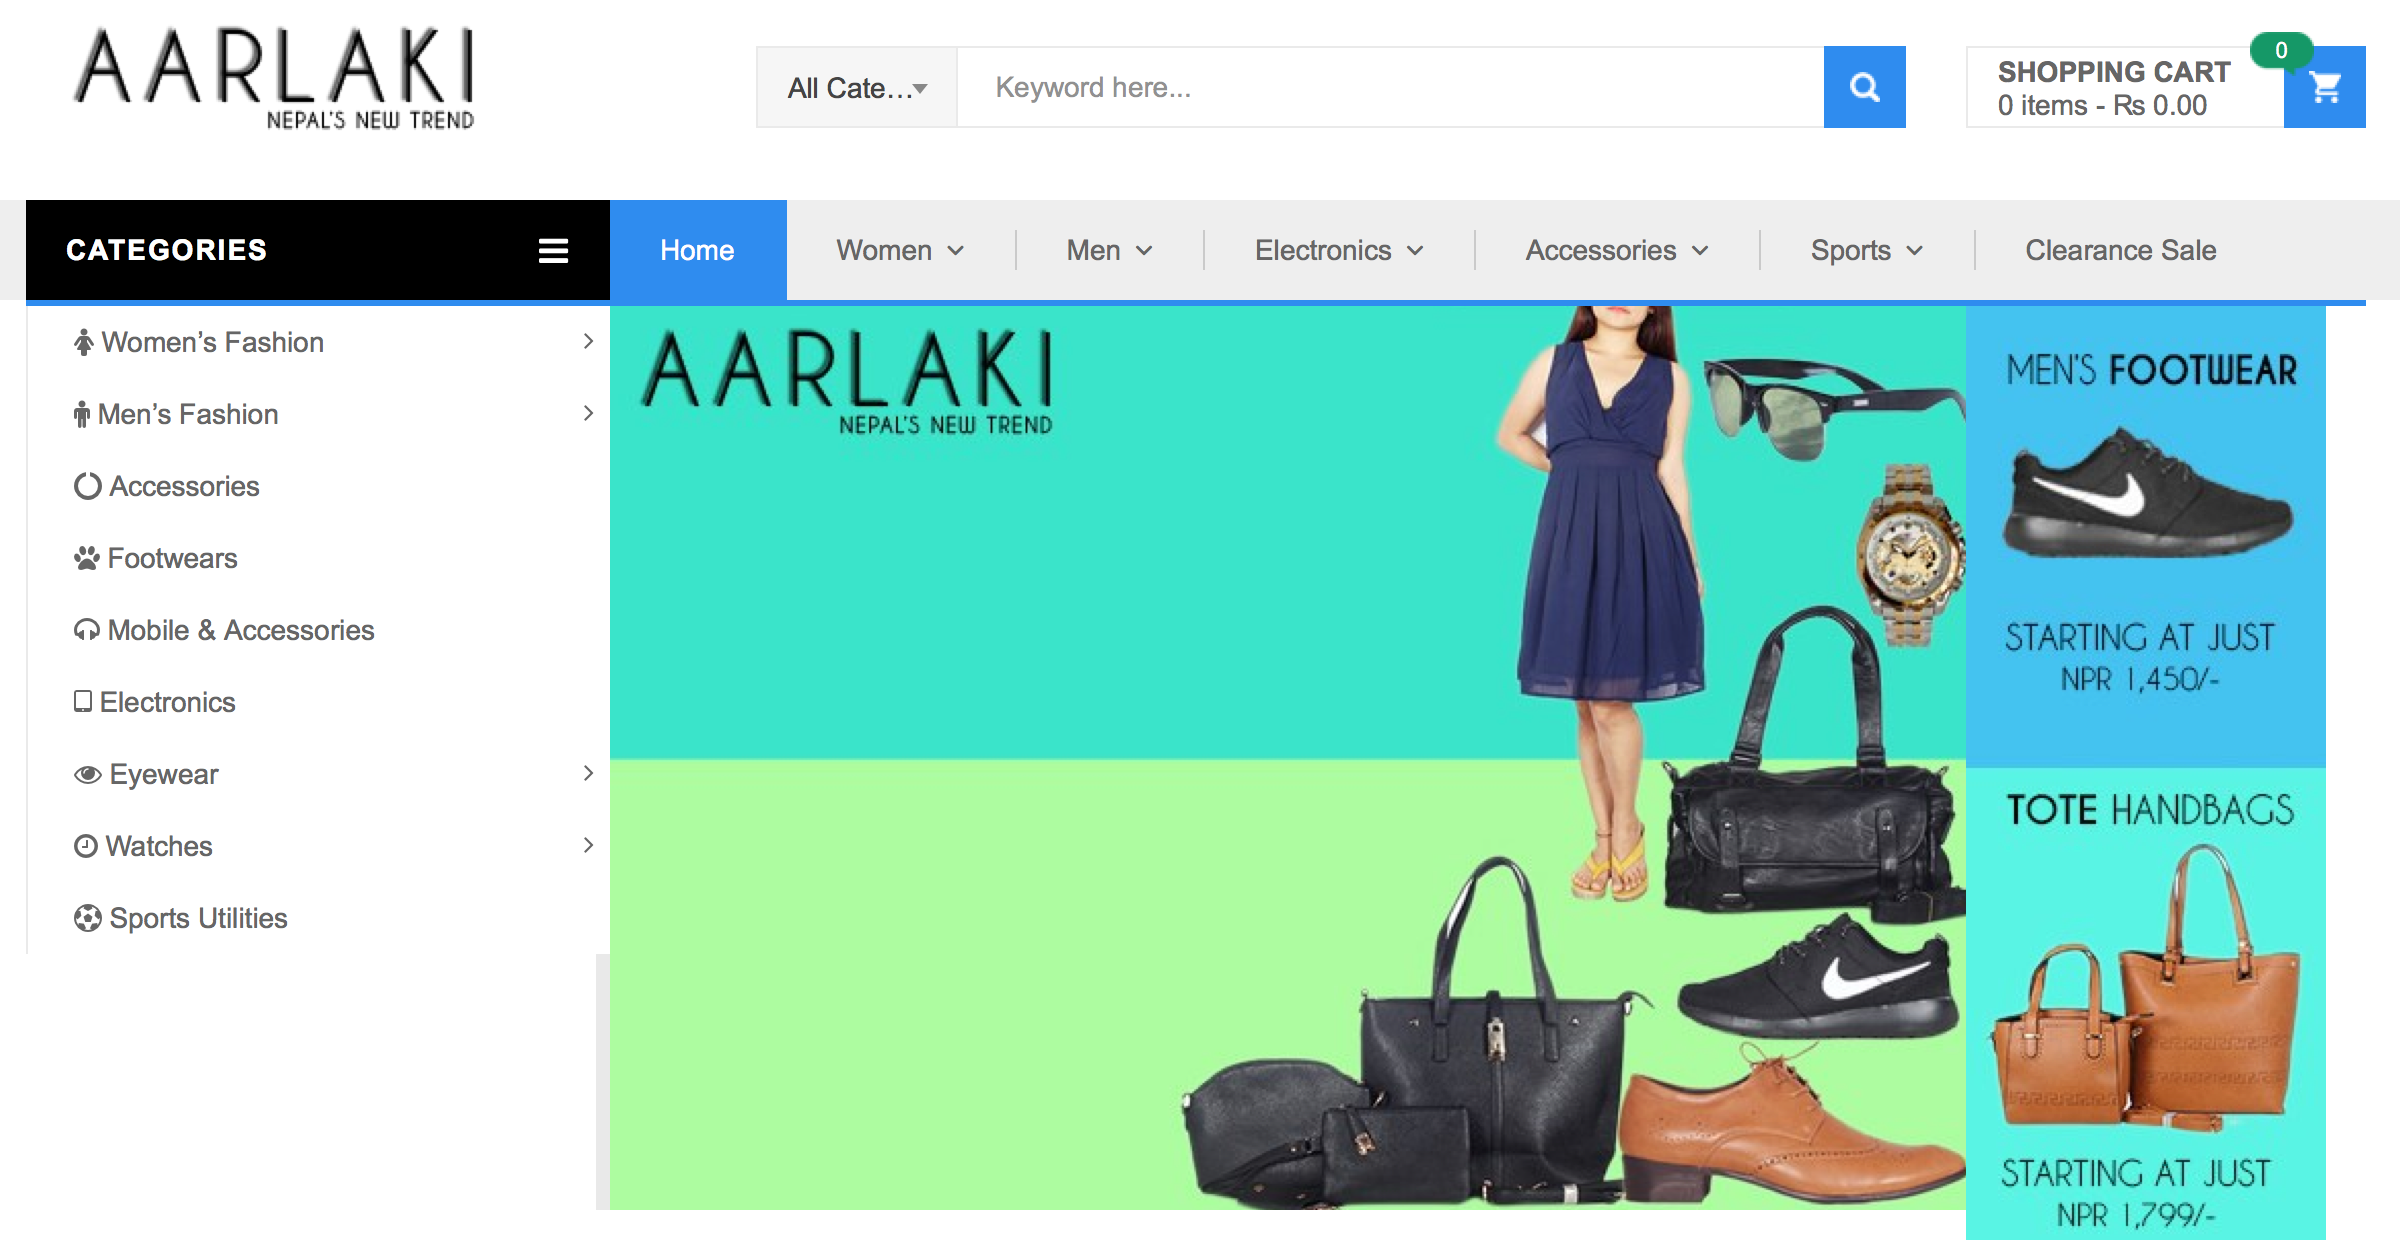 Aarlaki aims to fill the e-Commerce void outside the valley